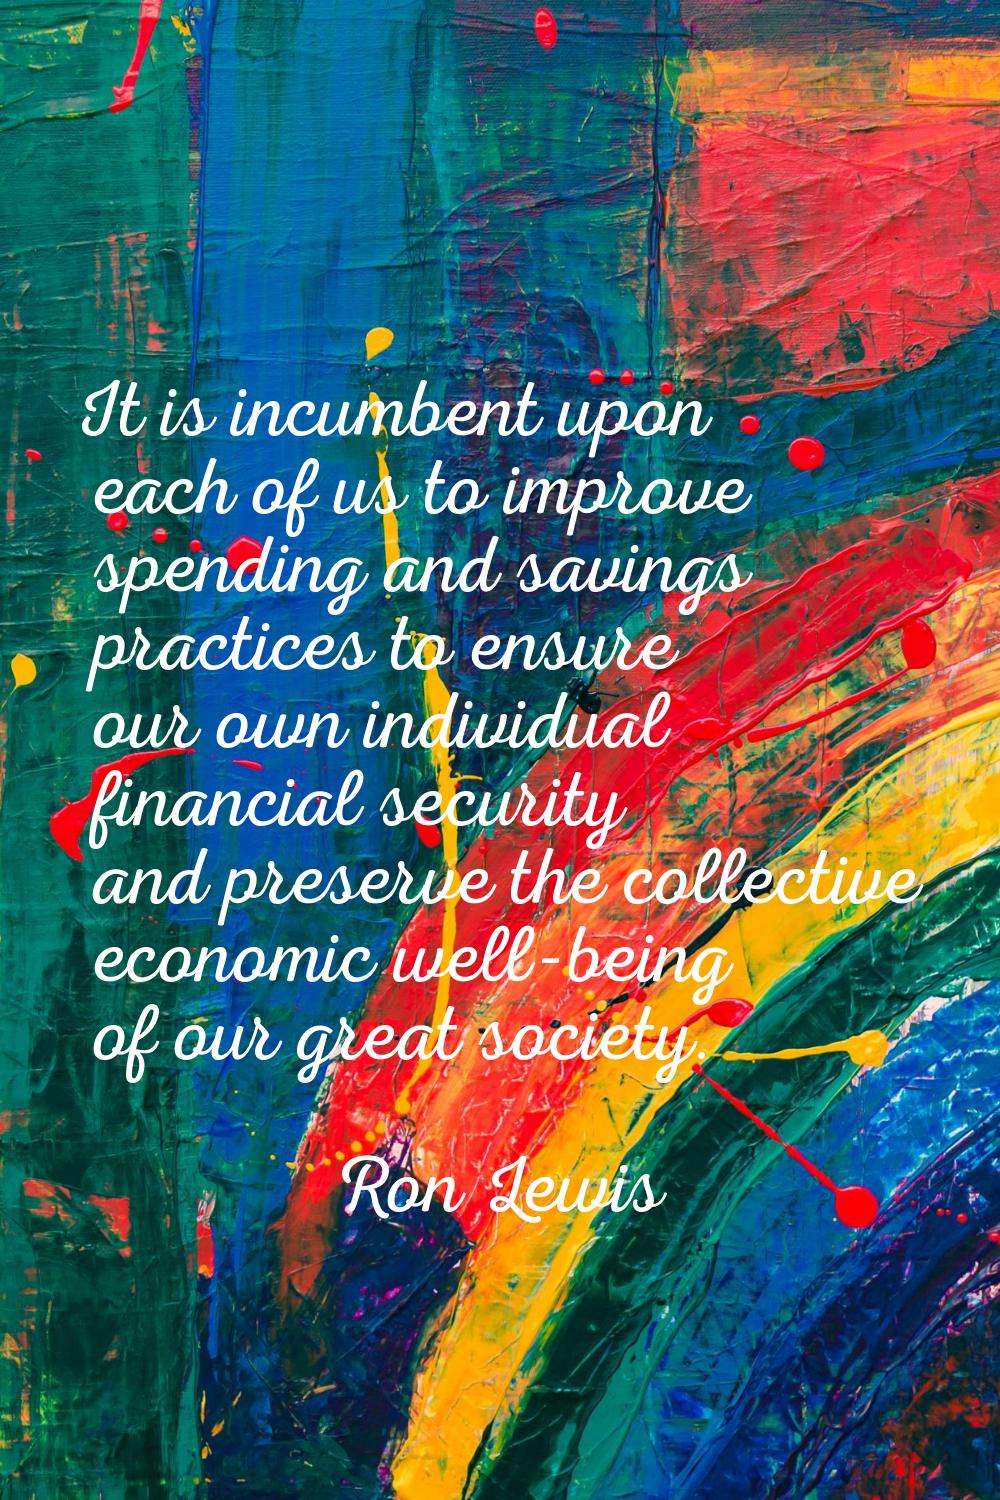 It is incumbent upon each of us to improve spending and savings practices to ensure our own individ